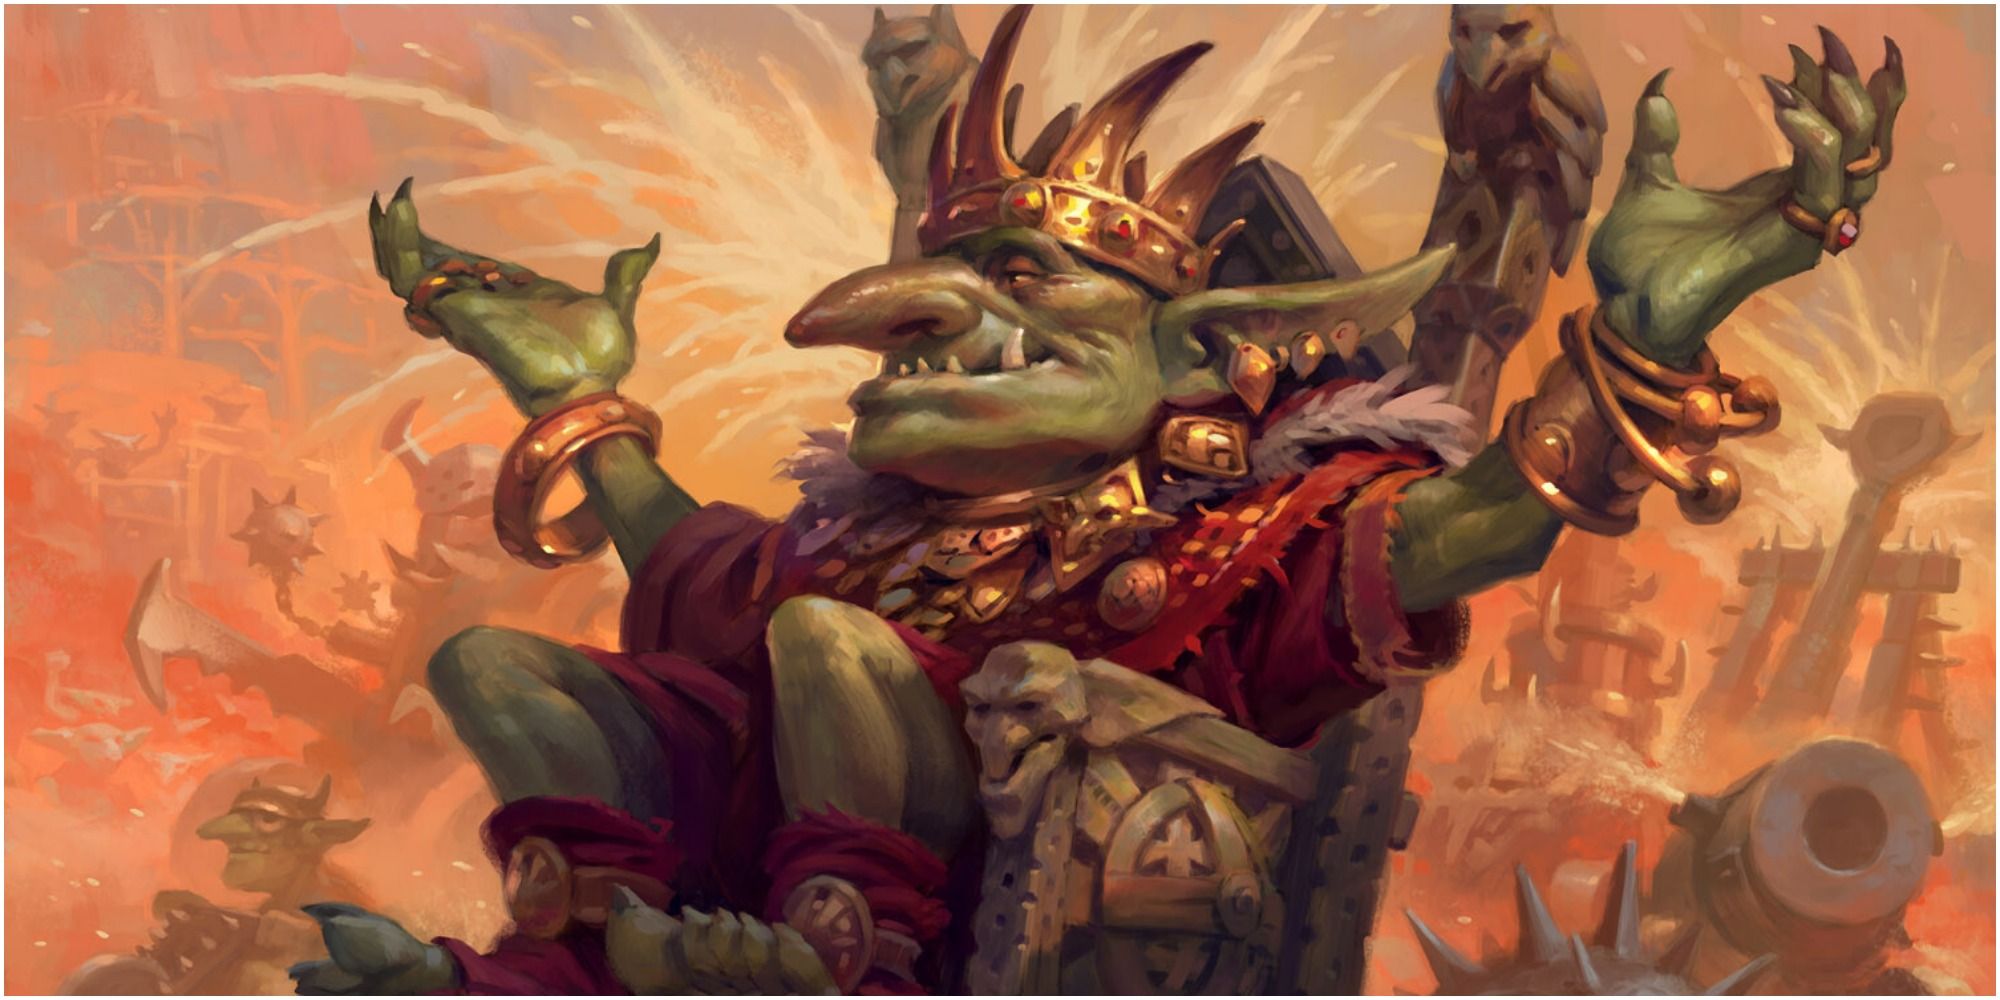 Top 10 Strongest Legendary Goblins In Magic The Gathering is one of the mos...